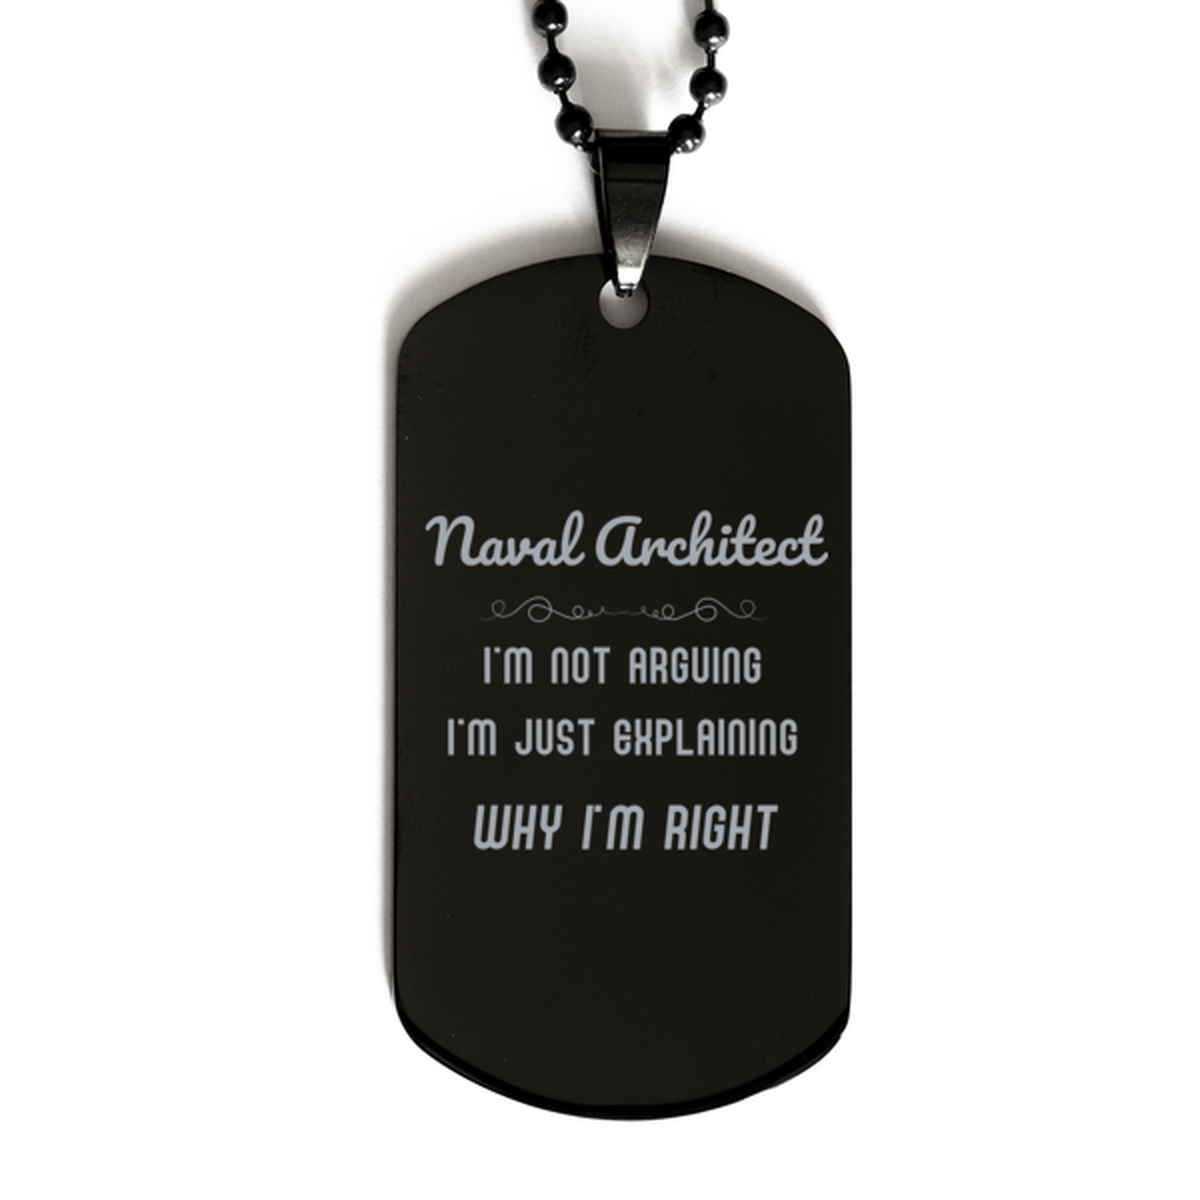 Naval Architect I'm not Arguing. I'm Just Explaining Why I'm RIGHT Black Dog Tag, Funny Saying Quote Naval Architect Gifts For Naval Architect Graduation Birthday Christmas Gifts for Men Women Coworker